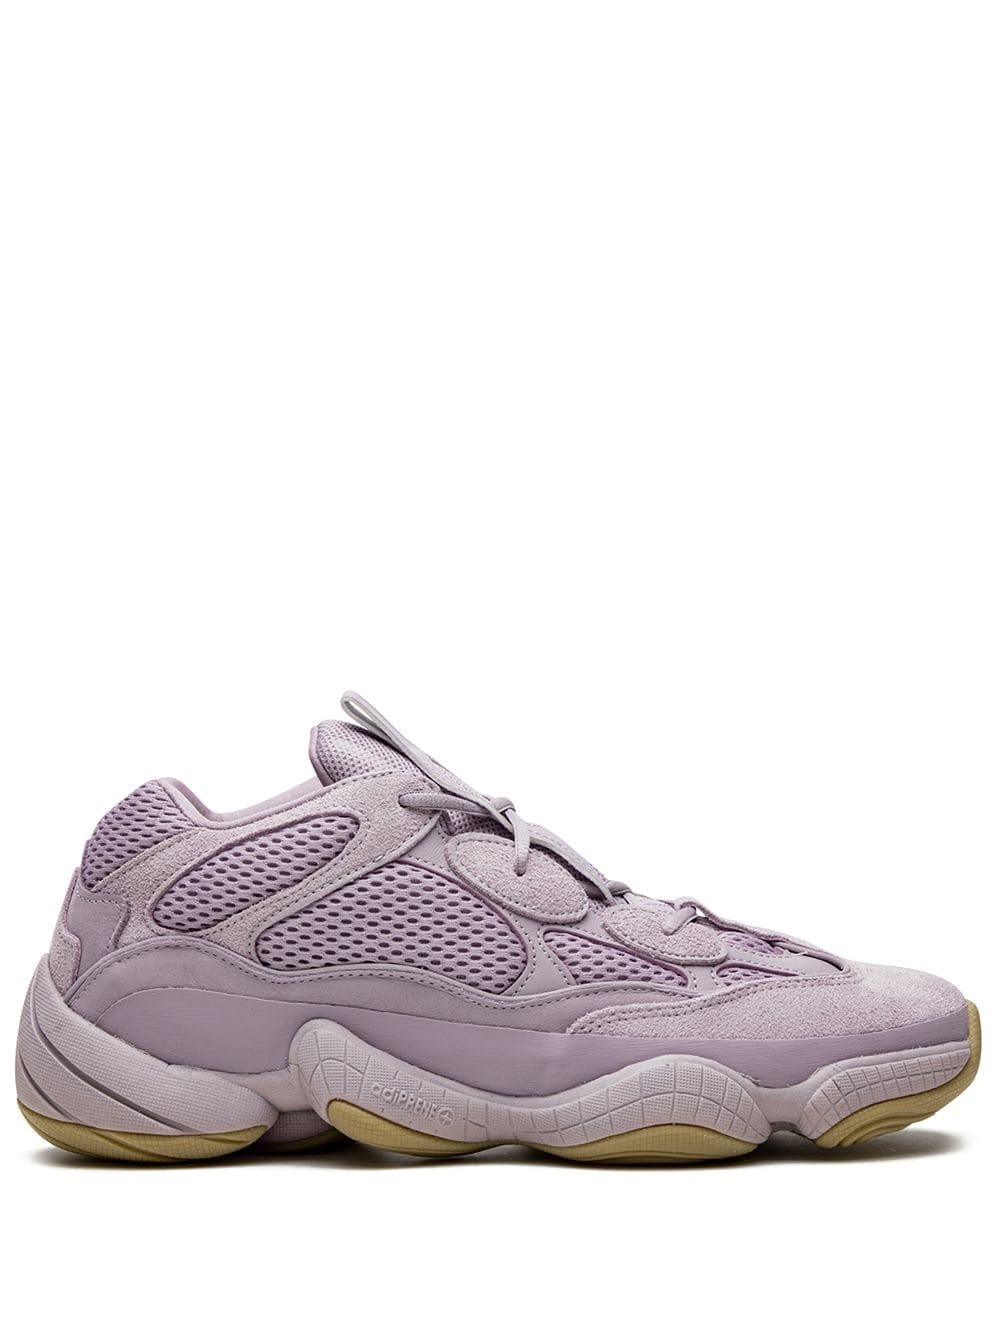 Yeezy 500 "Soft Vision" sneakers - 1